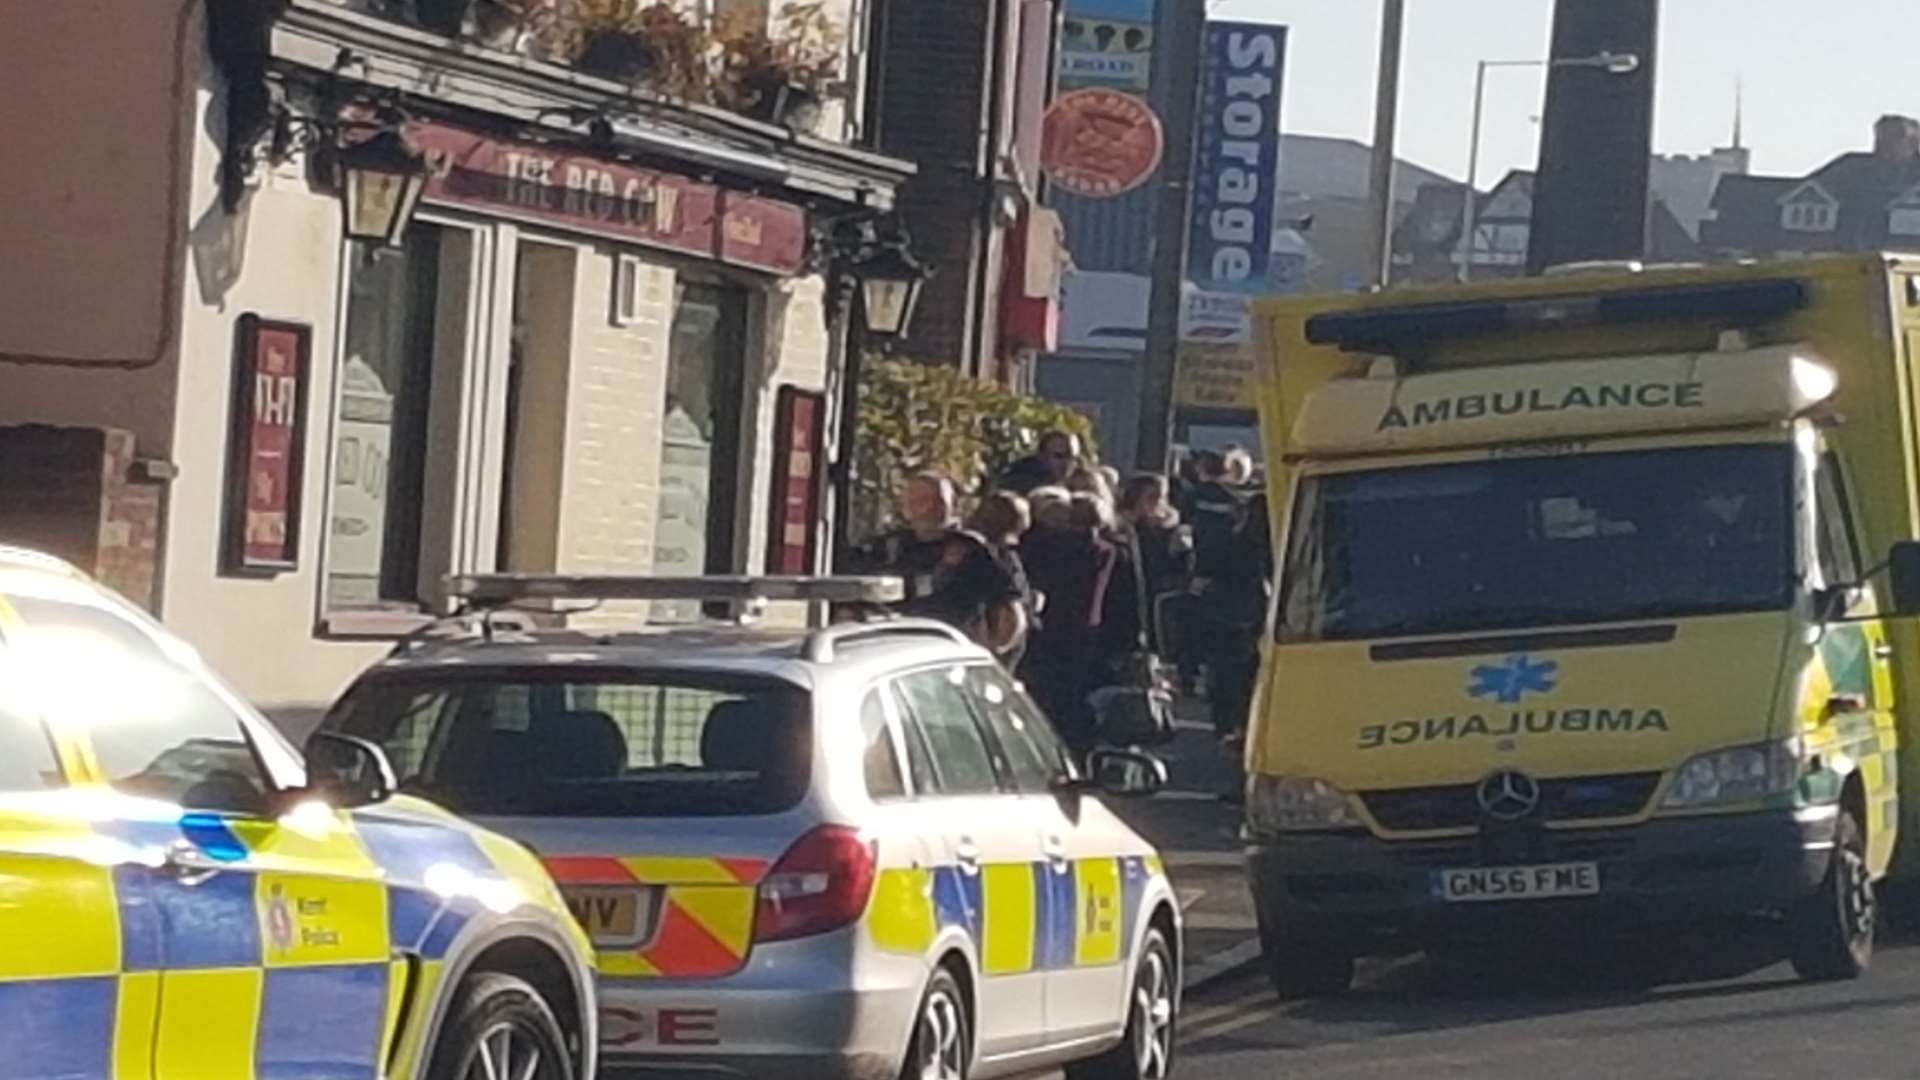 Police at the scene. Picture: Sean Axtell